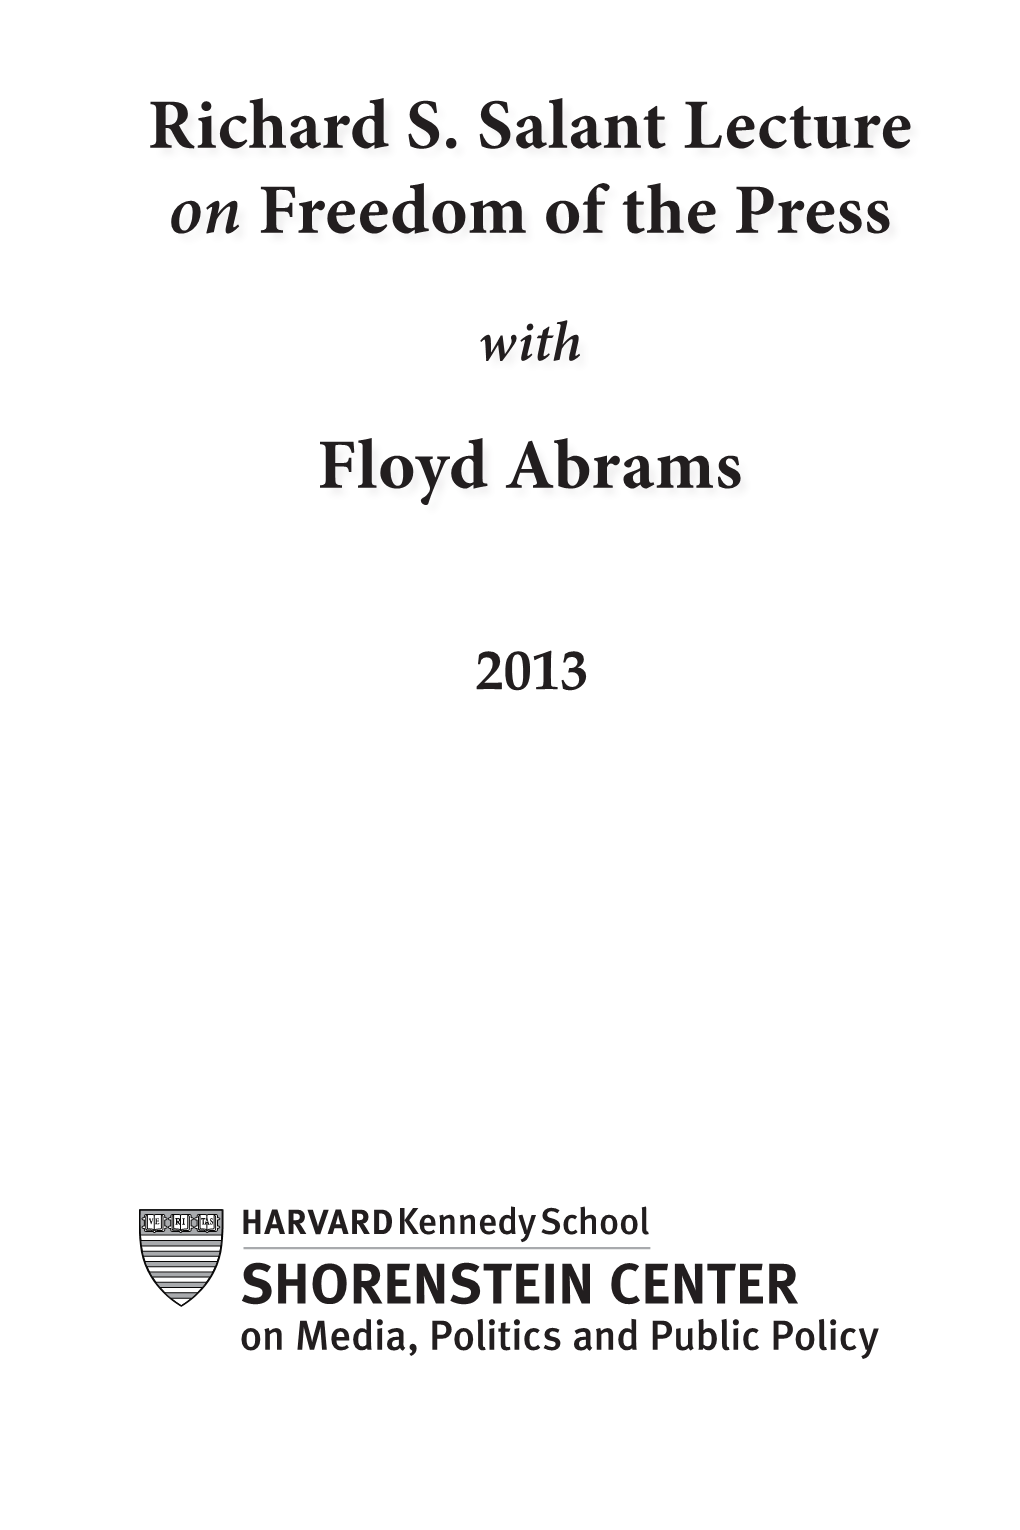 Richard S. Salant Lecture on Freedom of the Press Floyd Abrams